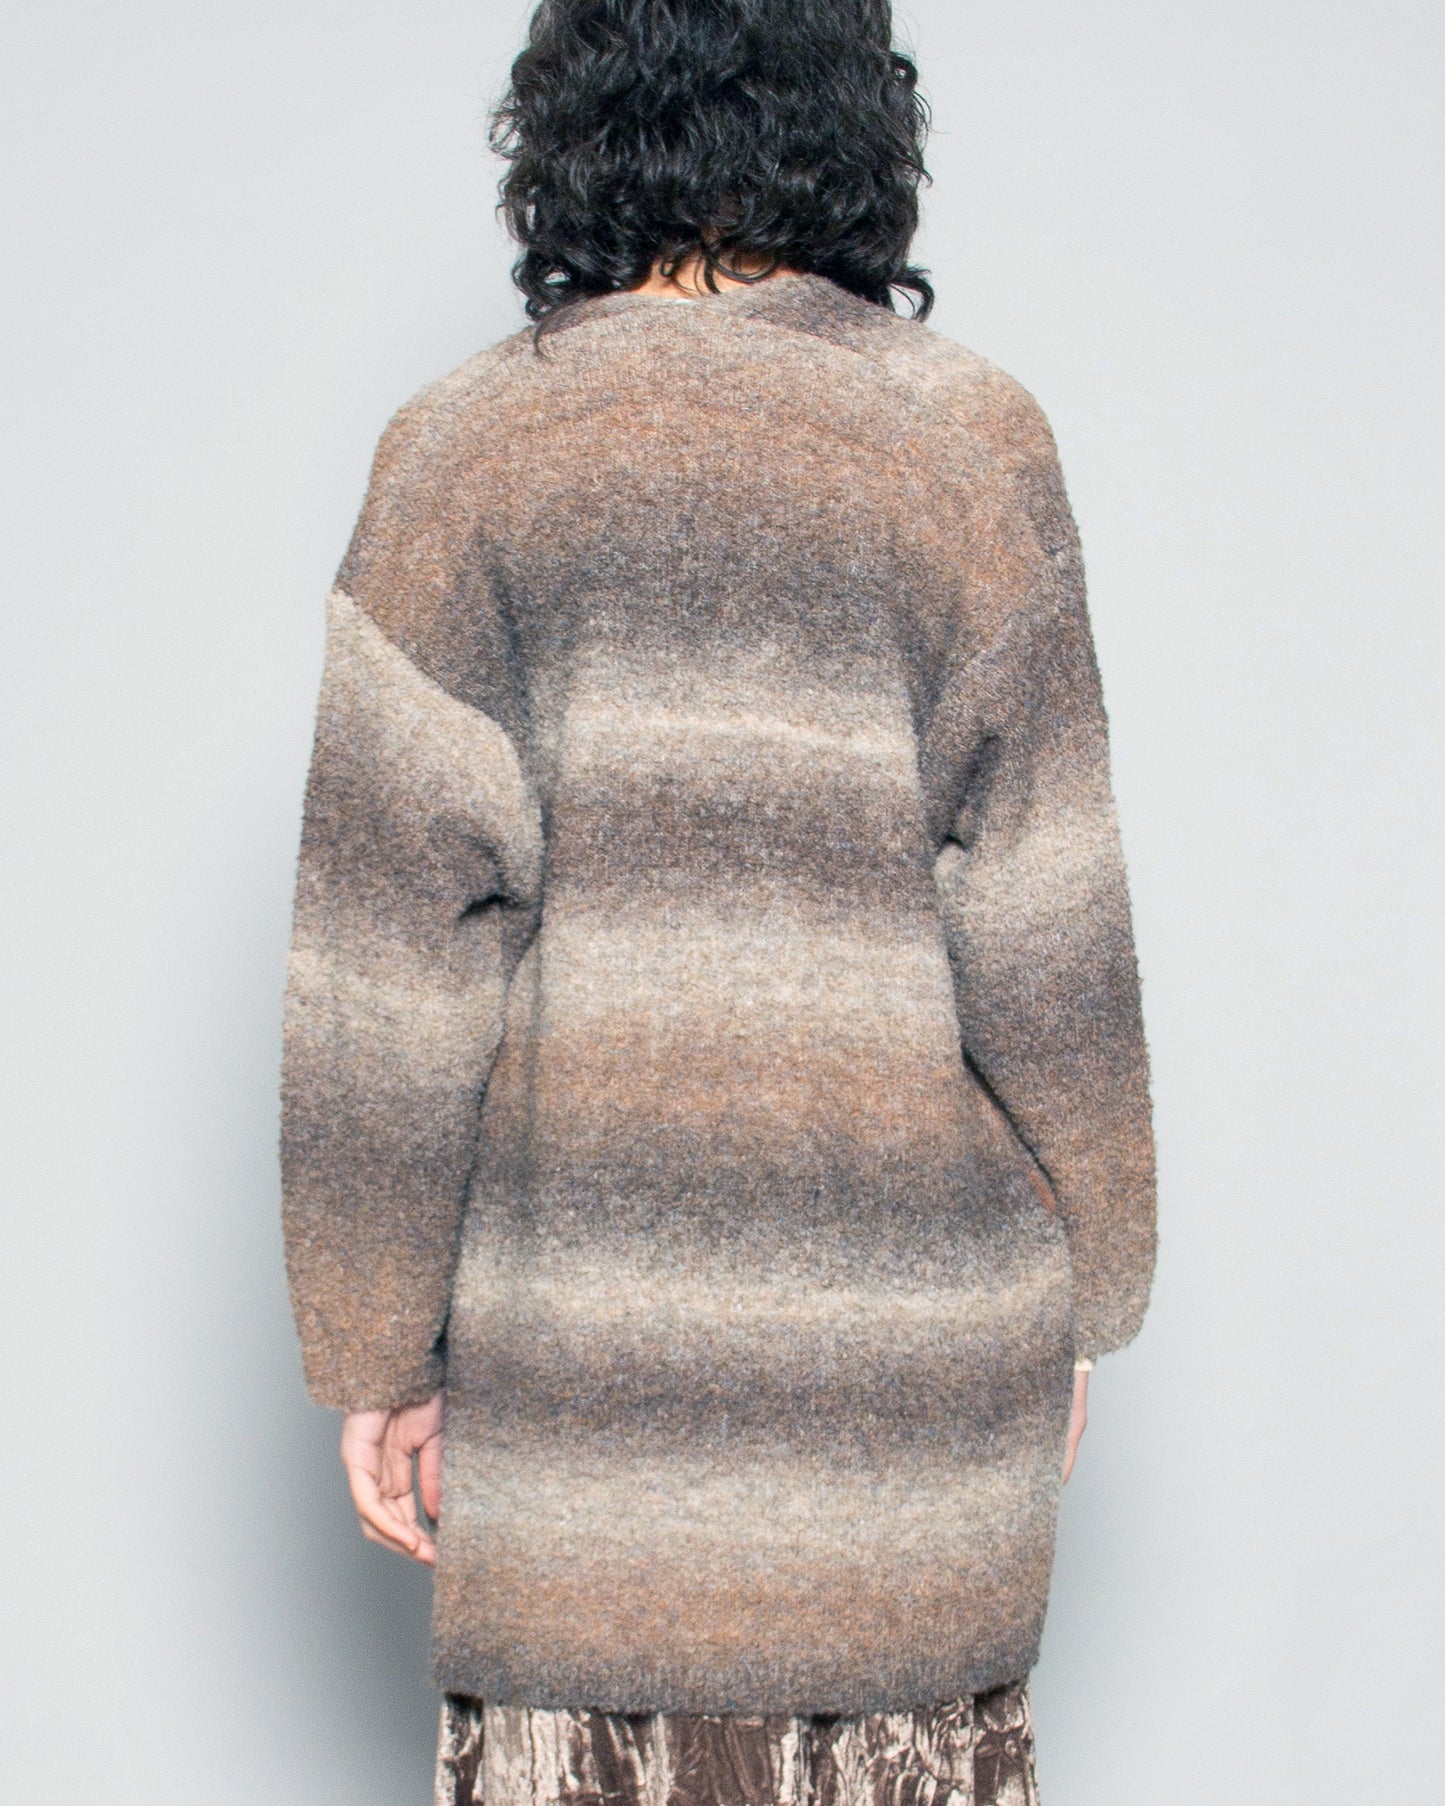 PERSONS Sloan Ombre Boucle Wool Blend Cardi in Brown Multi available at Lahn.shop